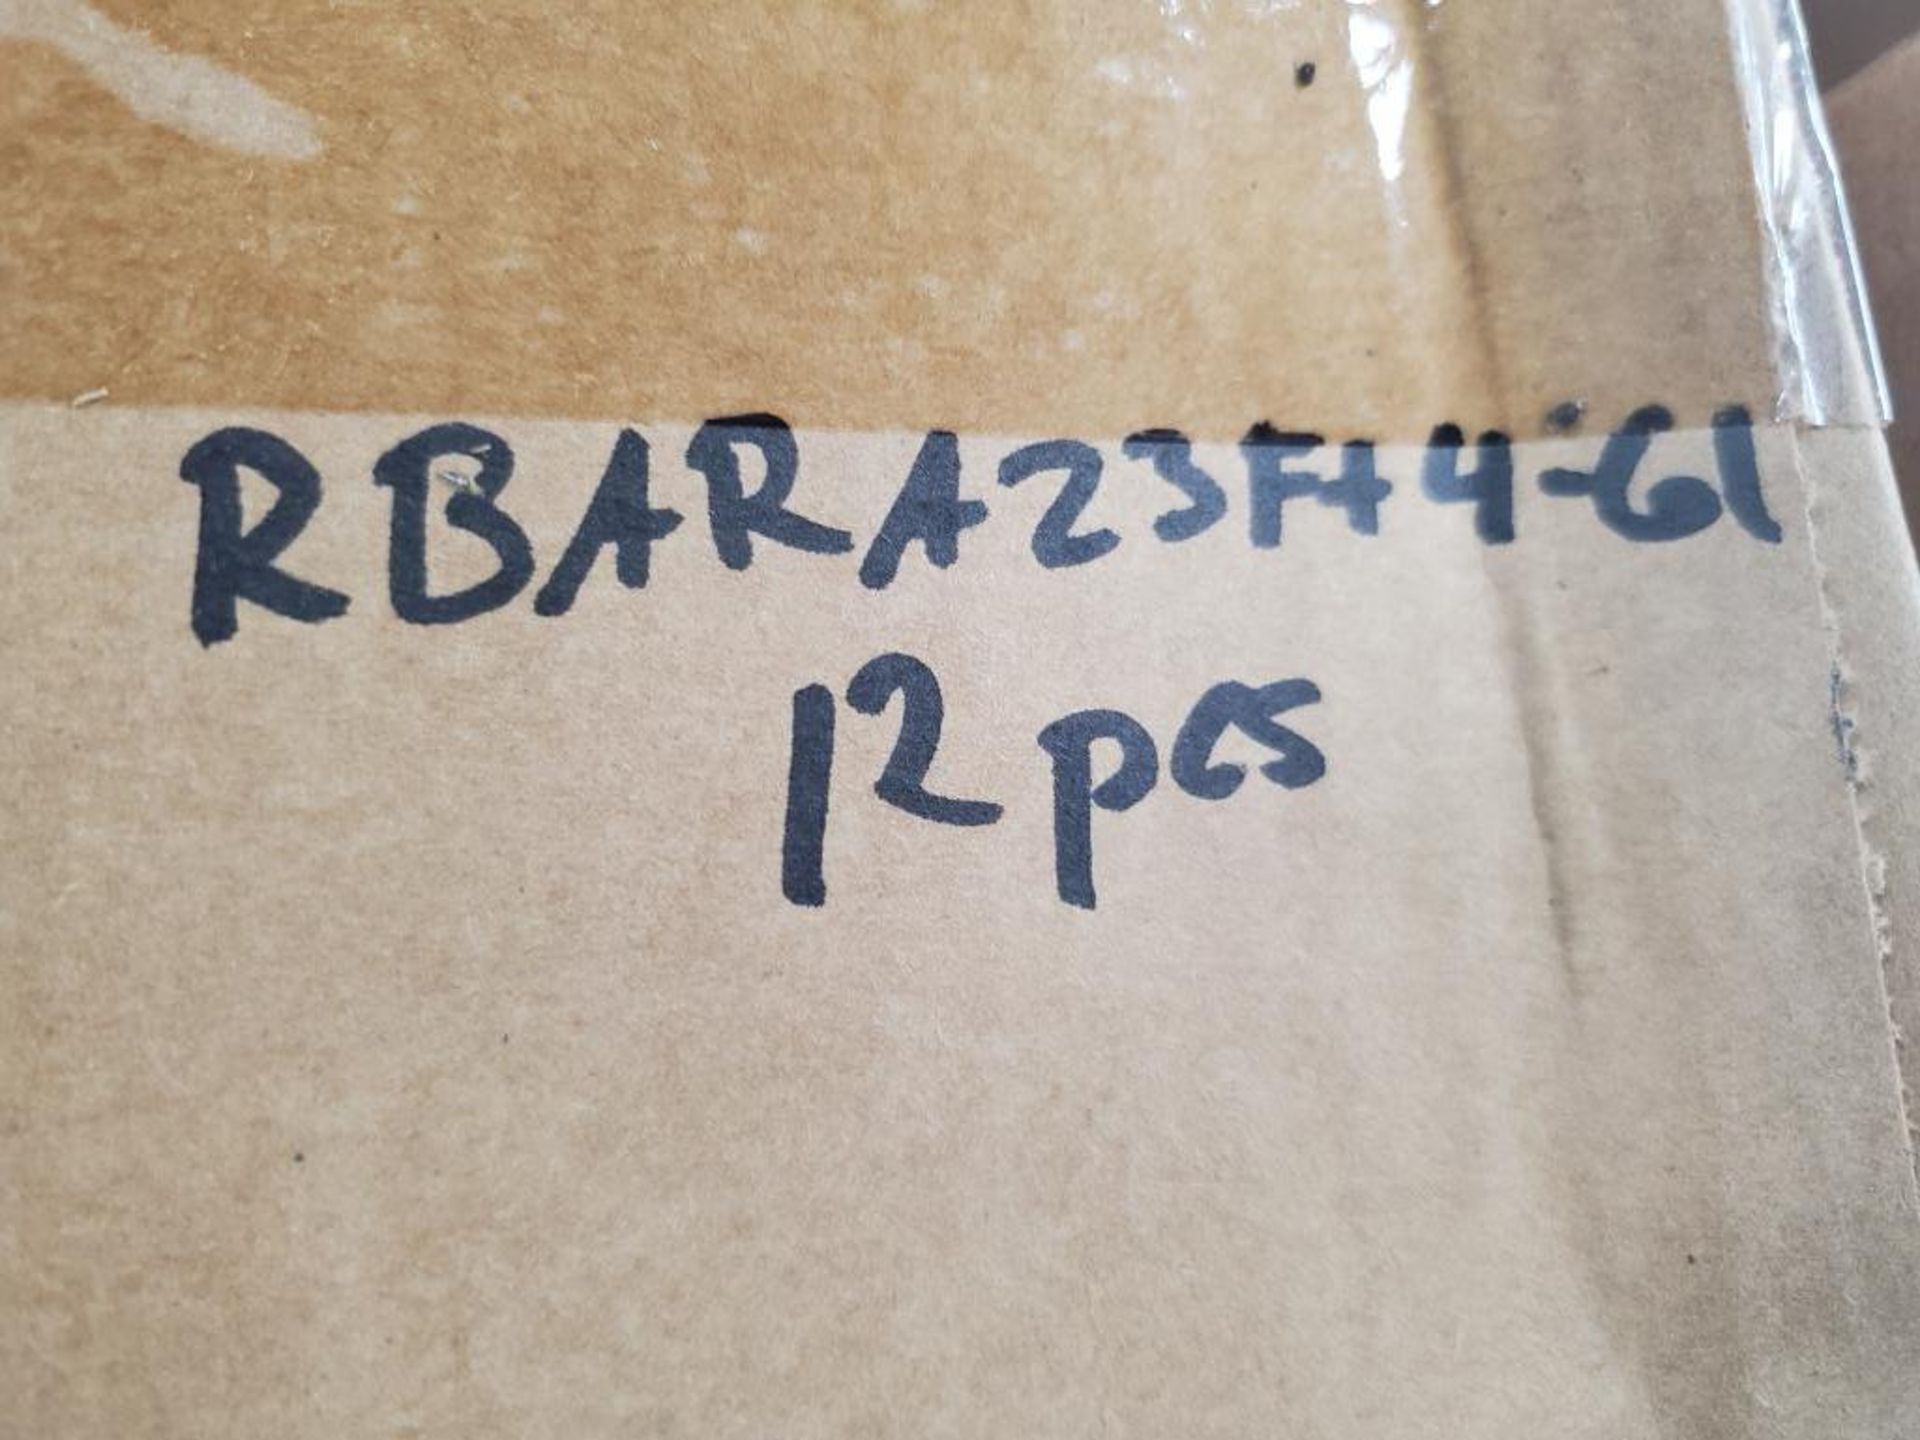 Qty 12 - Anderson 23ft battery adapter cable. RBARA23FT4-G1. 175A, 600V plug. New in box. - Image 2 of 5